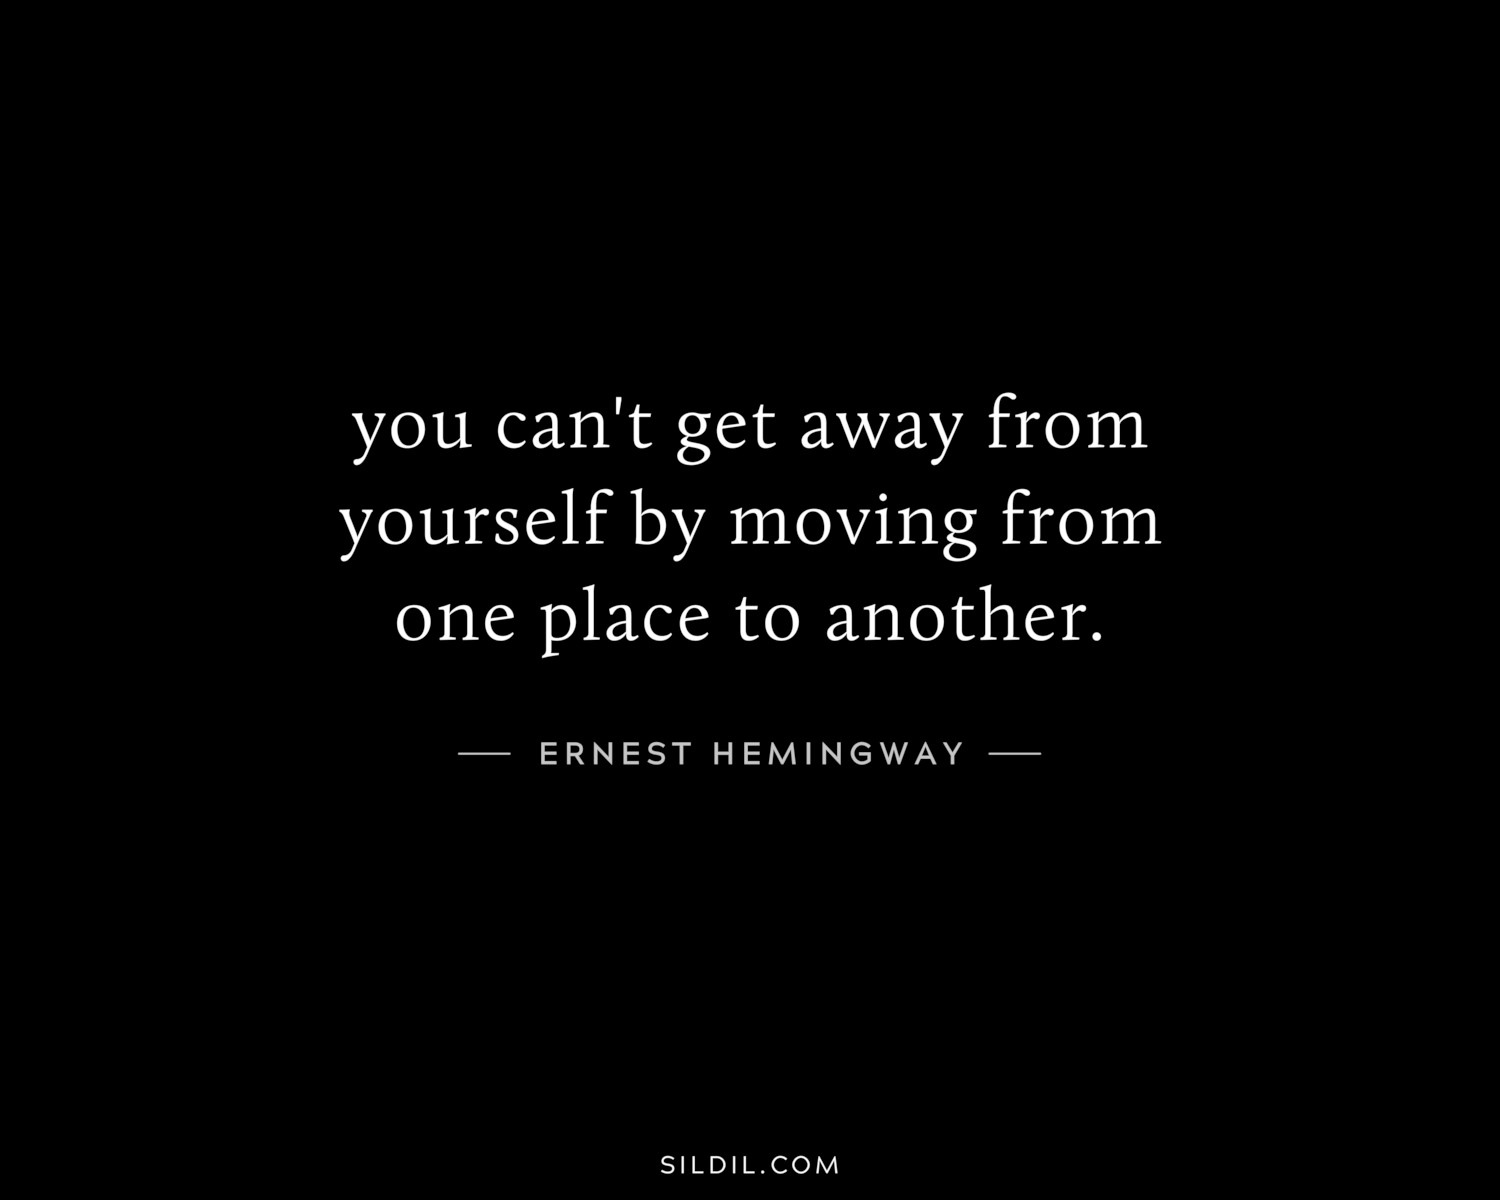 you can't get away from yourself by moving from one place to another.